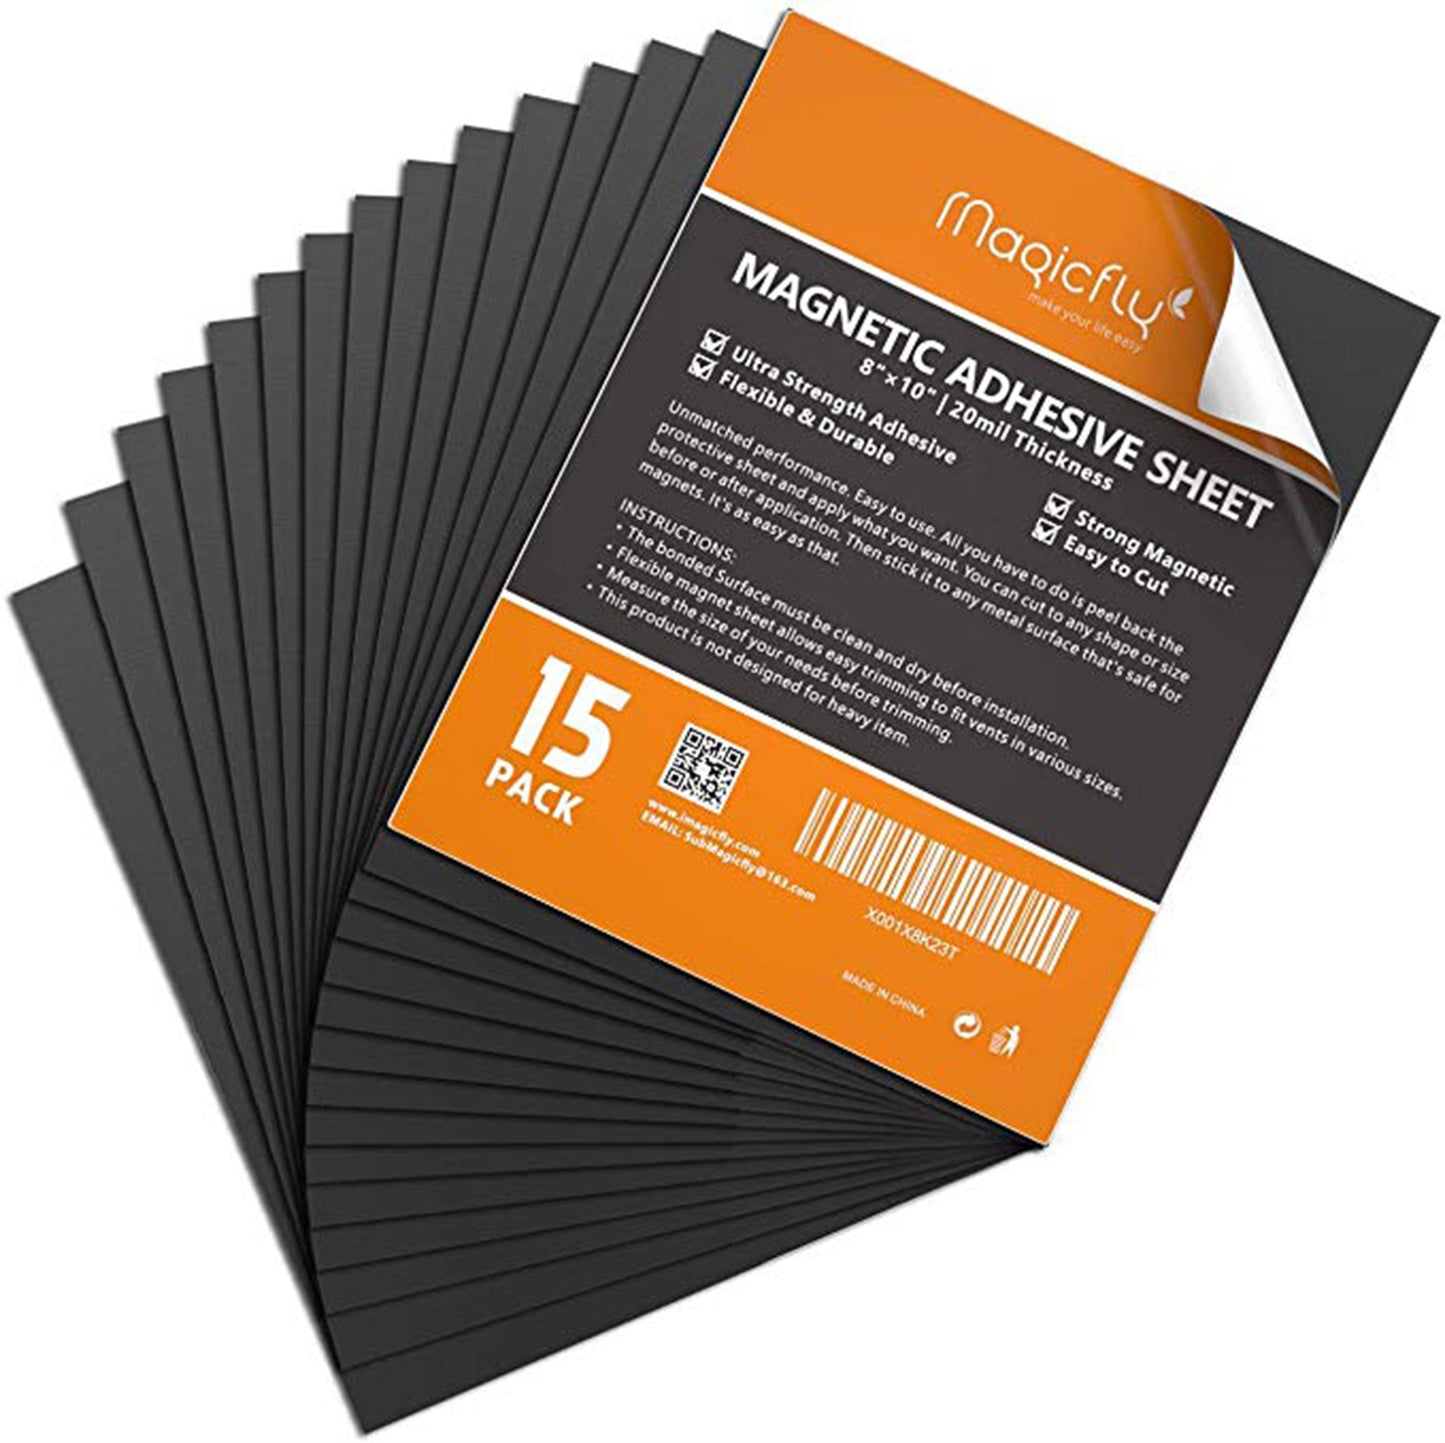 Adhesive Magnetic Sheets, 8 x 10, 15 Pack, Magnetic Sheet - Mr